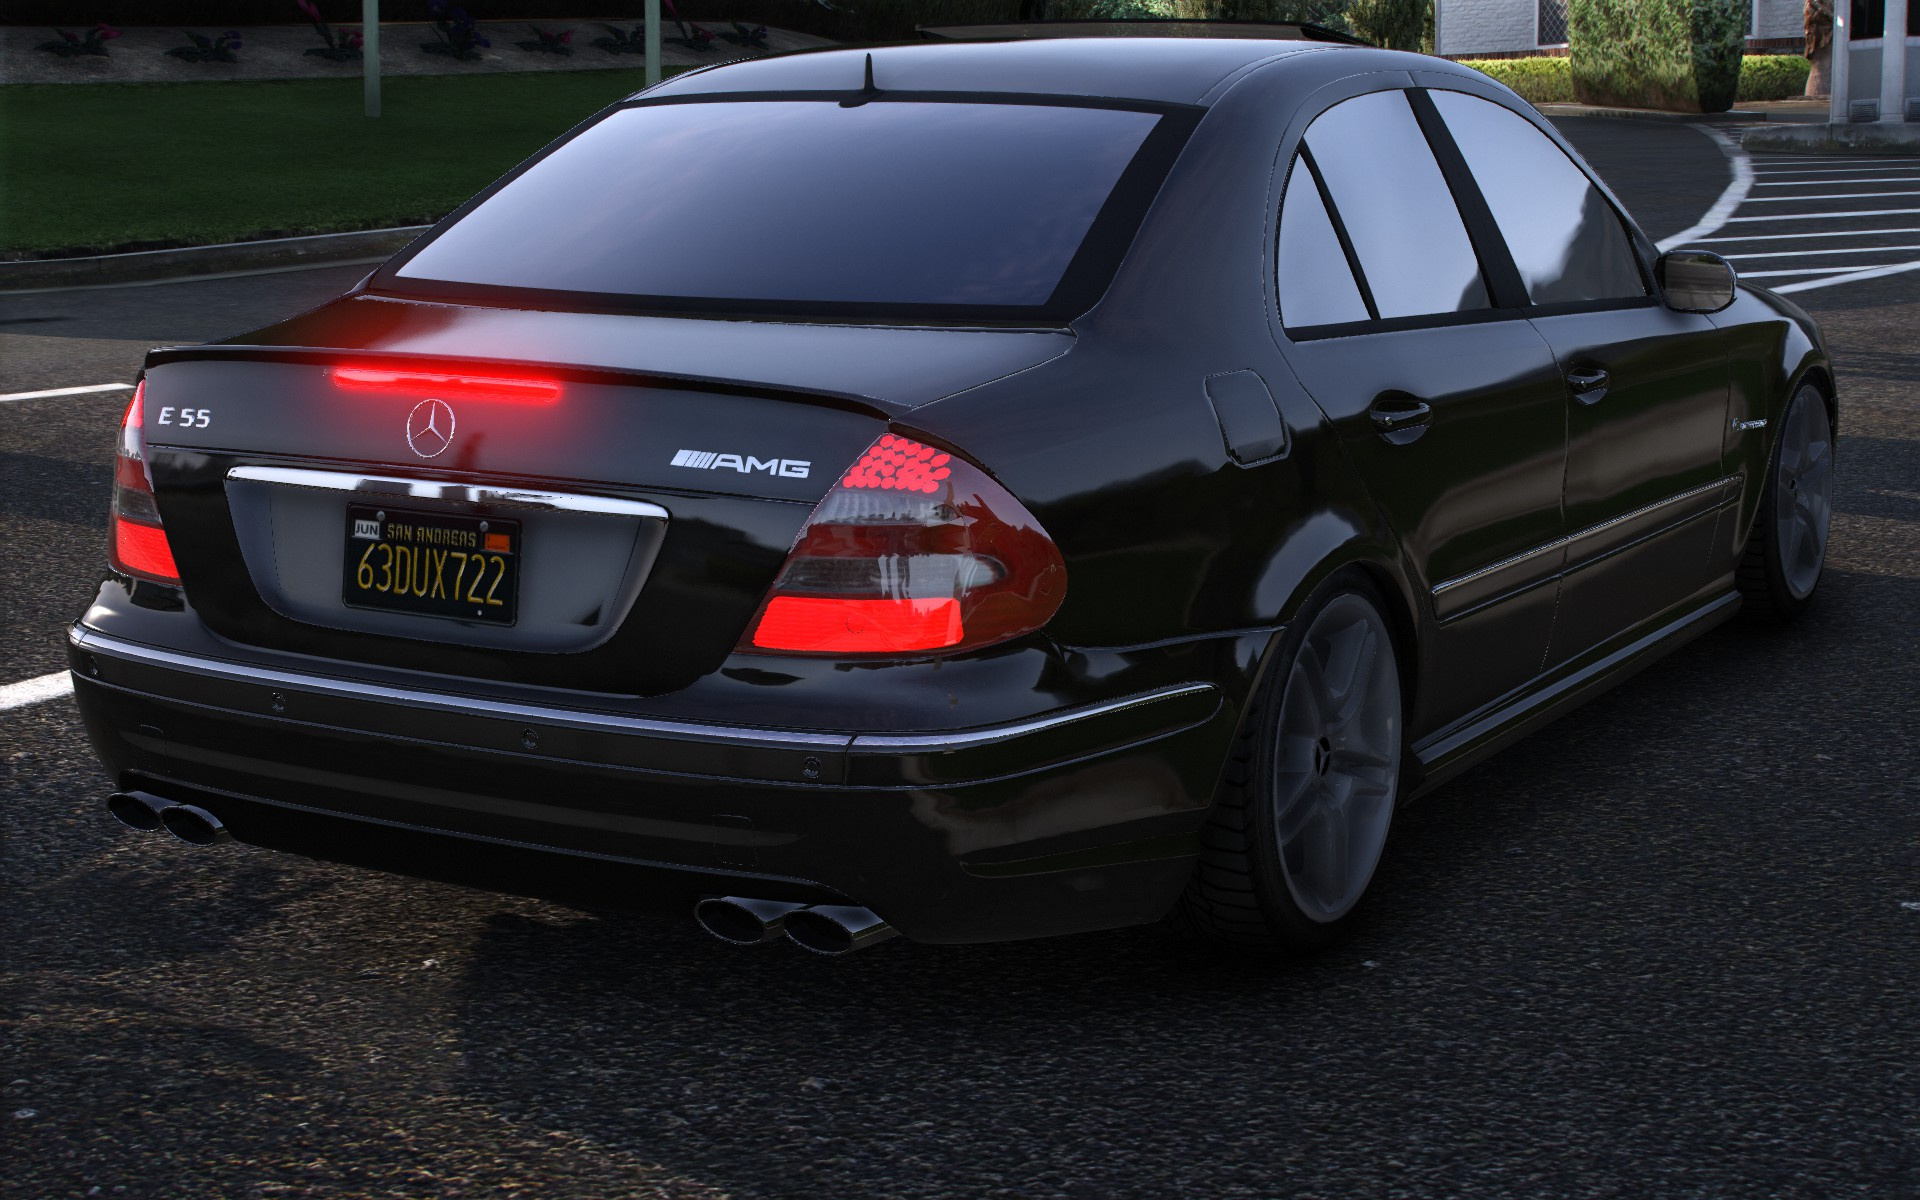 https://img.gta5-mods.com/q95/images/mercedes-benz-e55-amg-add-on-replace-tuning-realistic-sound-handling/99eb65-20231011222939_1.jpg